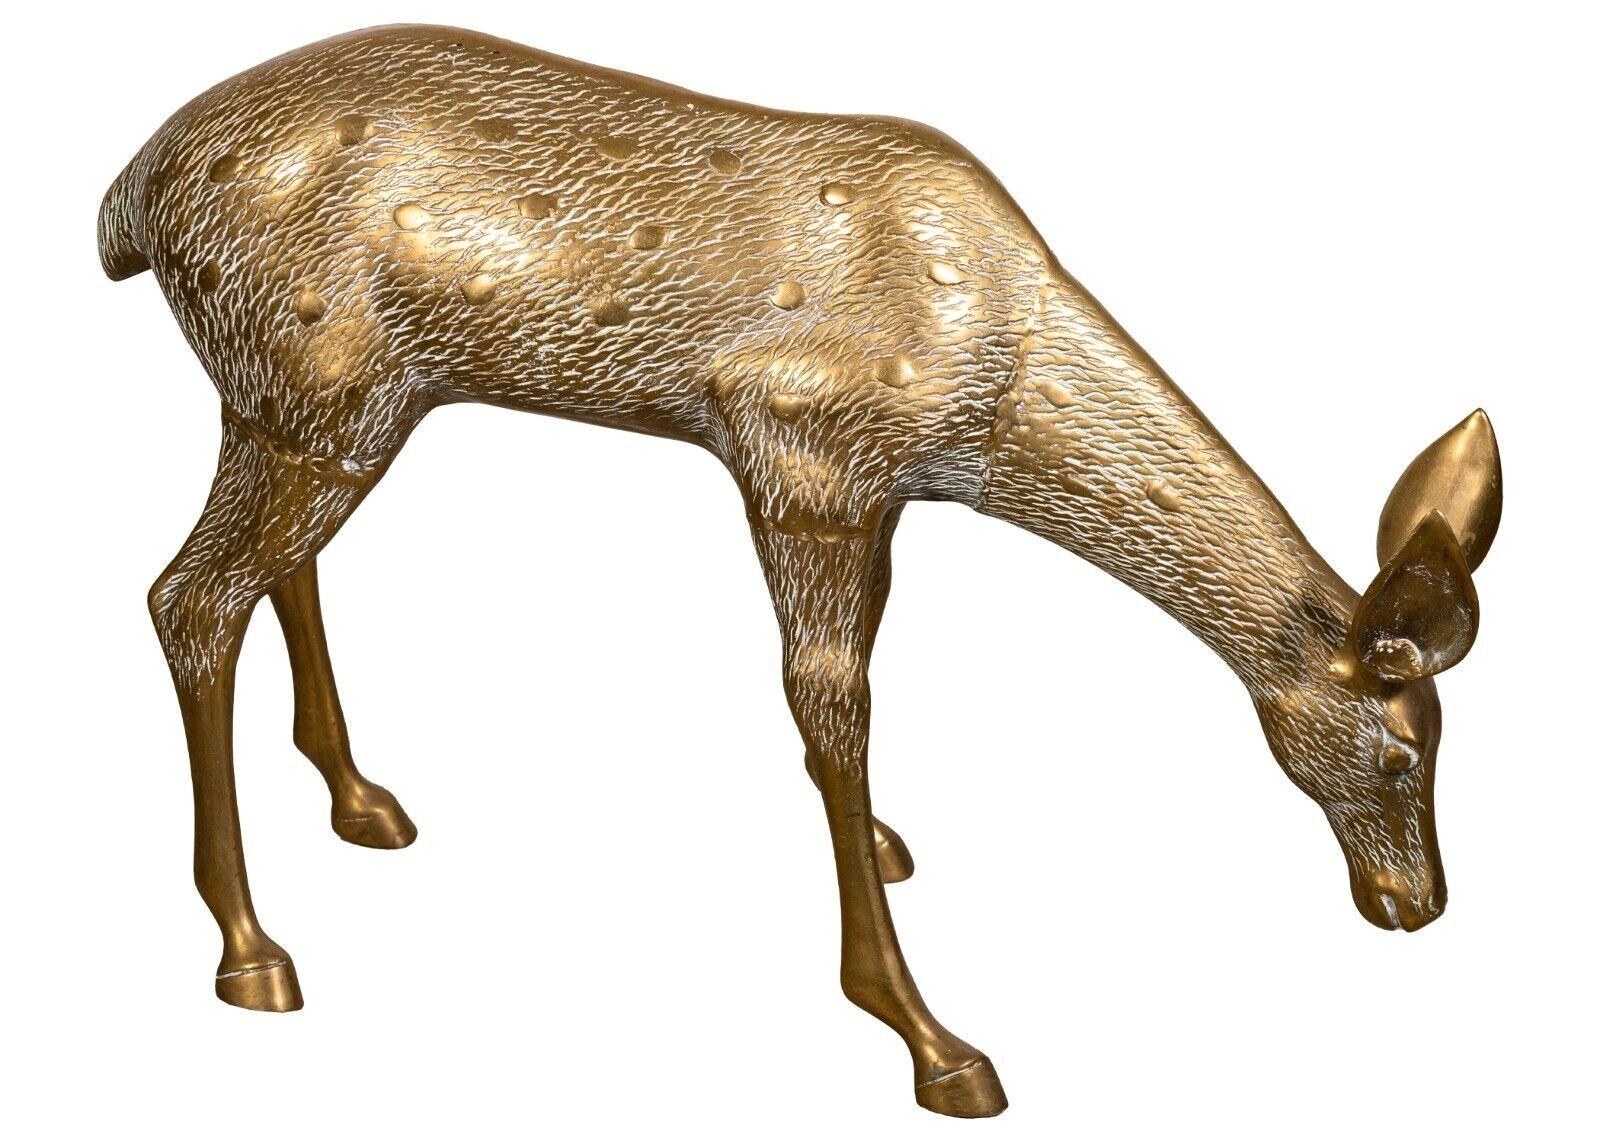 A large pair of brass deer sculptures, buck & doe. This lively pair of sculptures have been very skillfully created for a very dynamic viewing experience. Their positions look as if they are actively moving in space. They look fantastic as a pair.